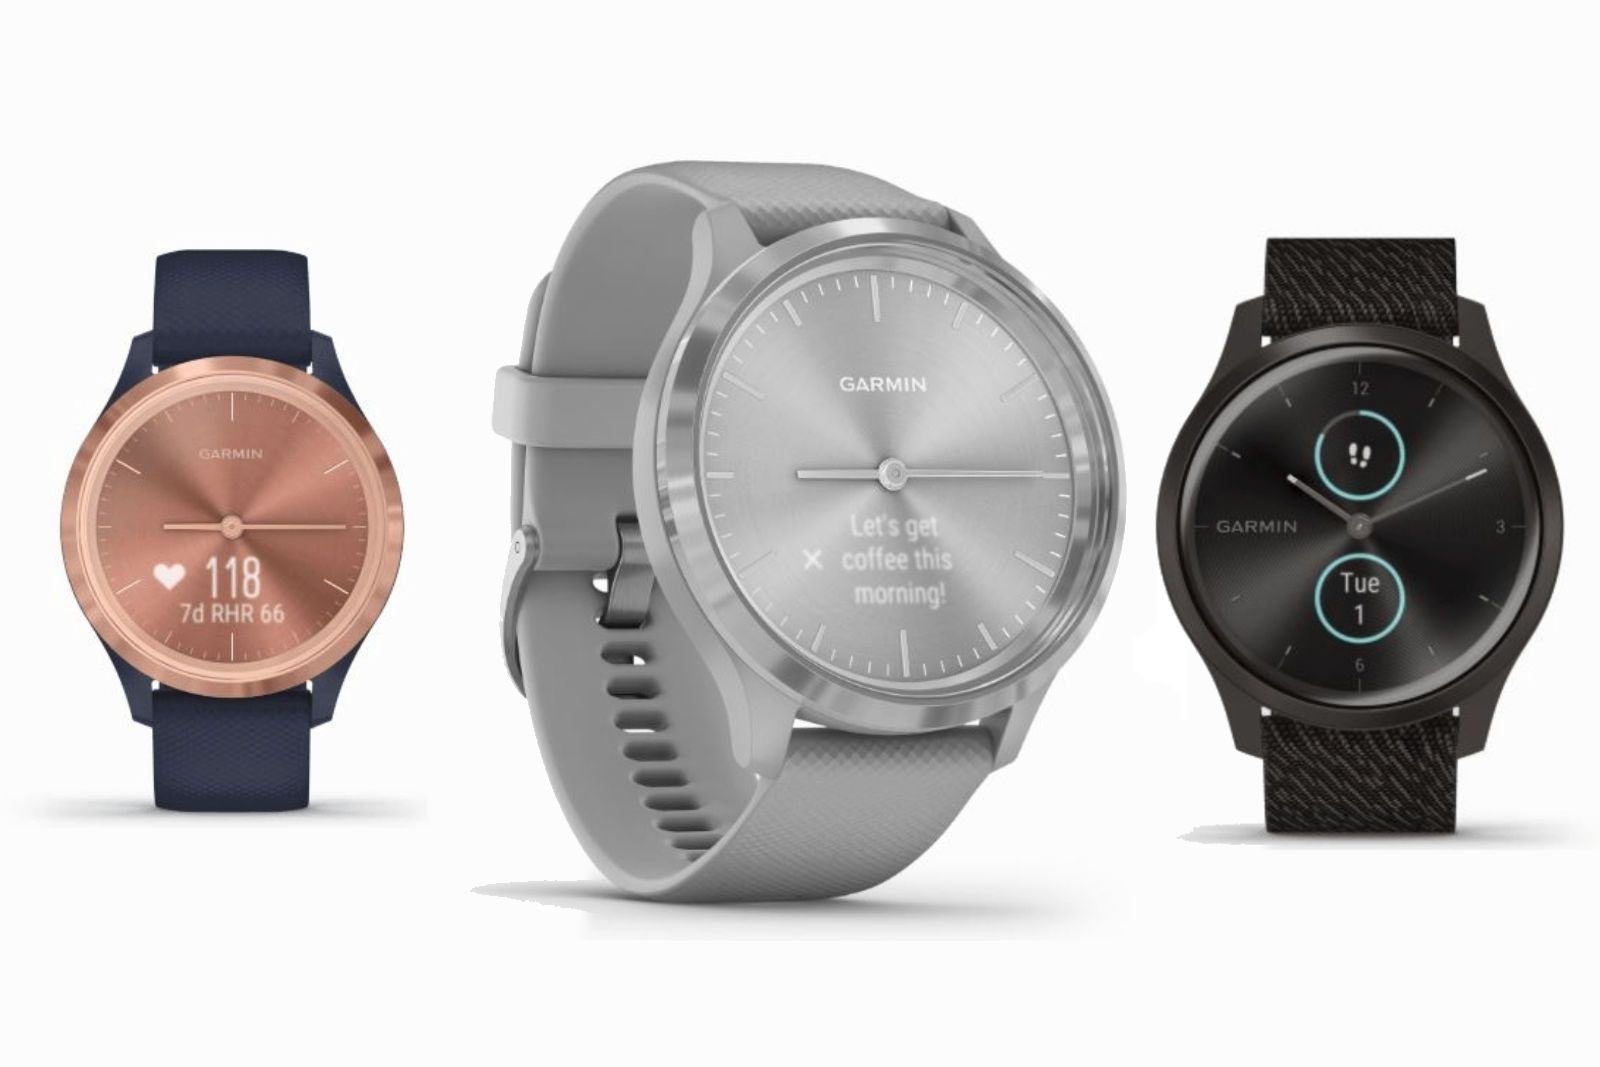 Six new Garmin watches have leaked, showing an entire new lineup